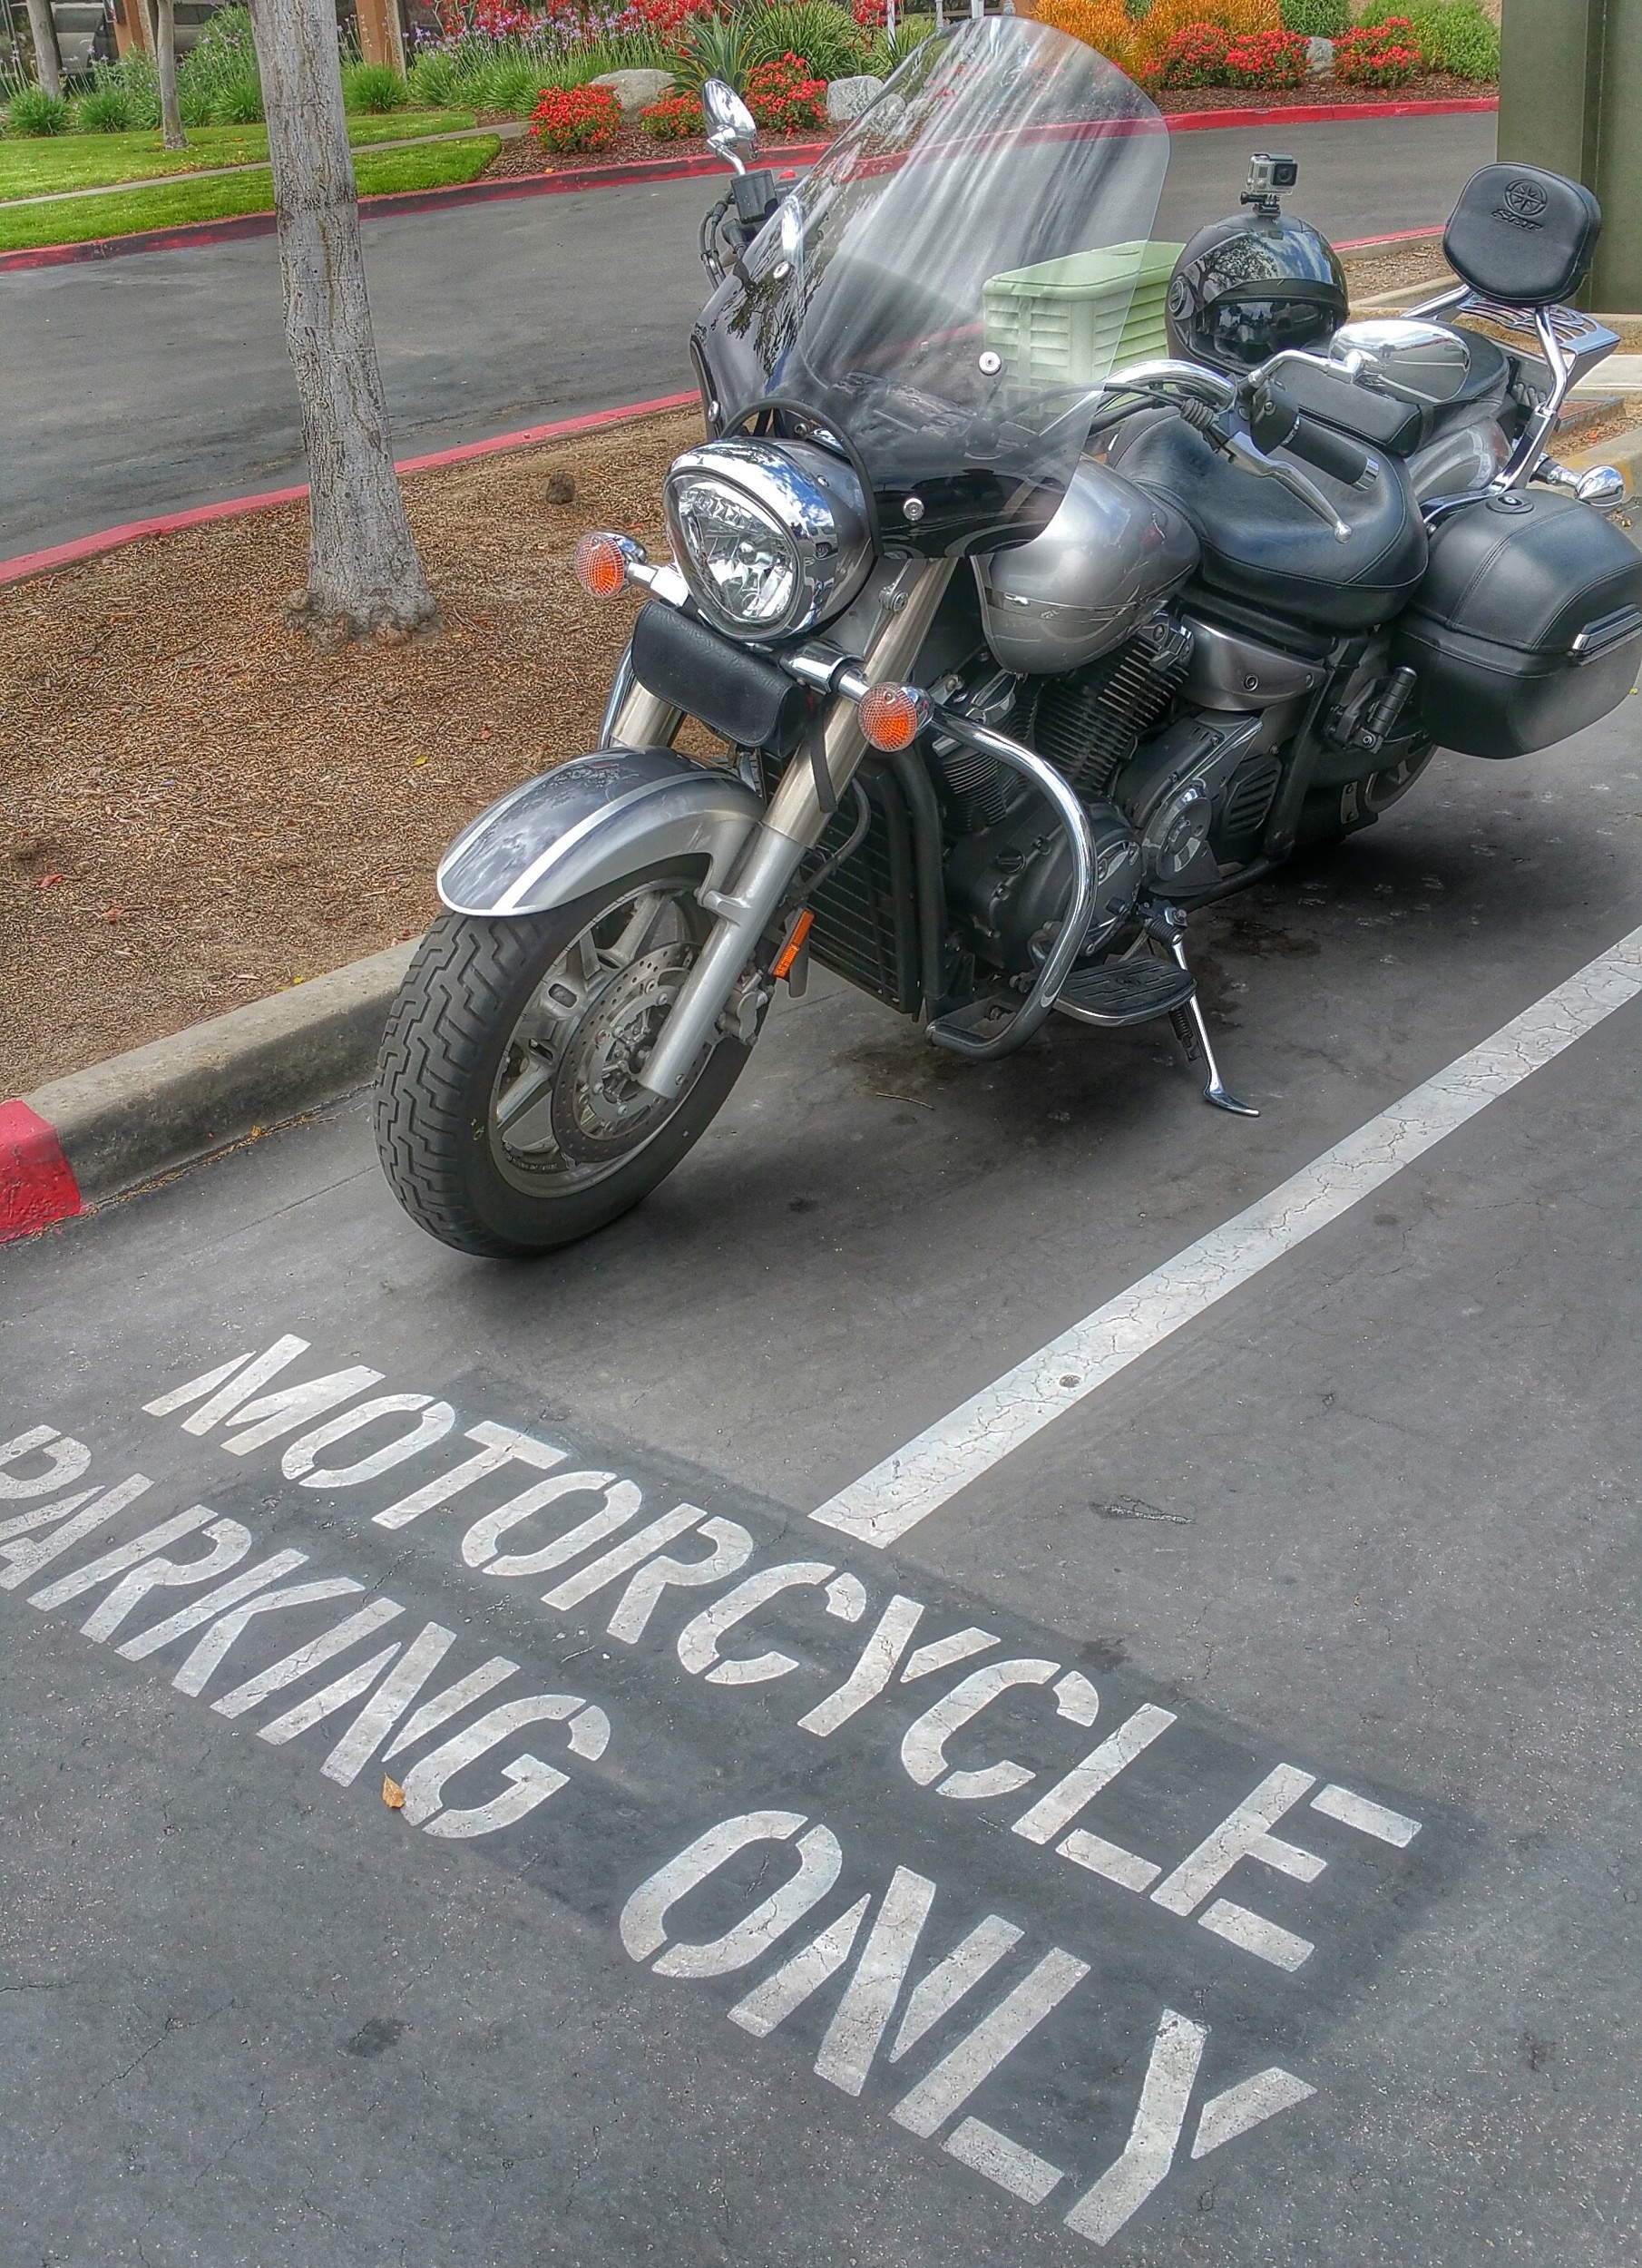 Moto Parking only